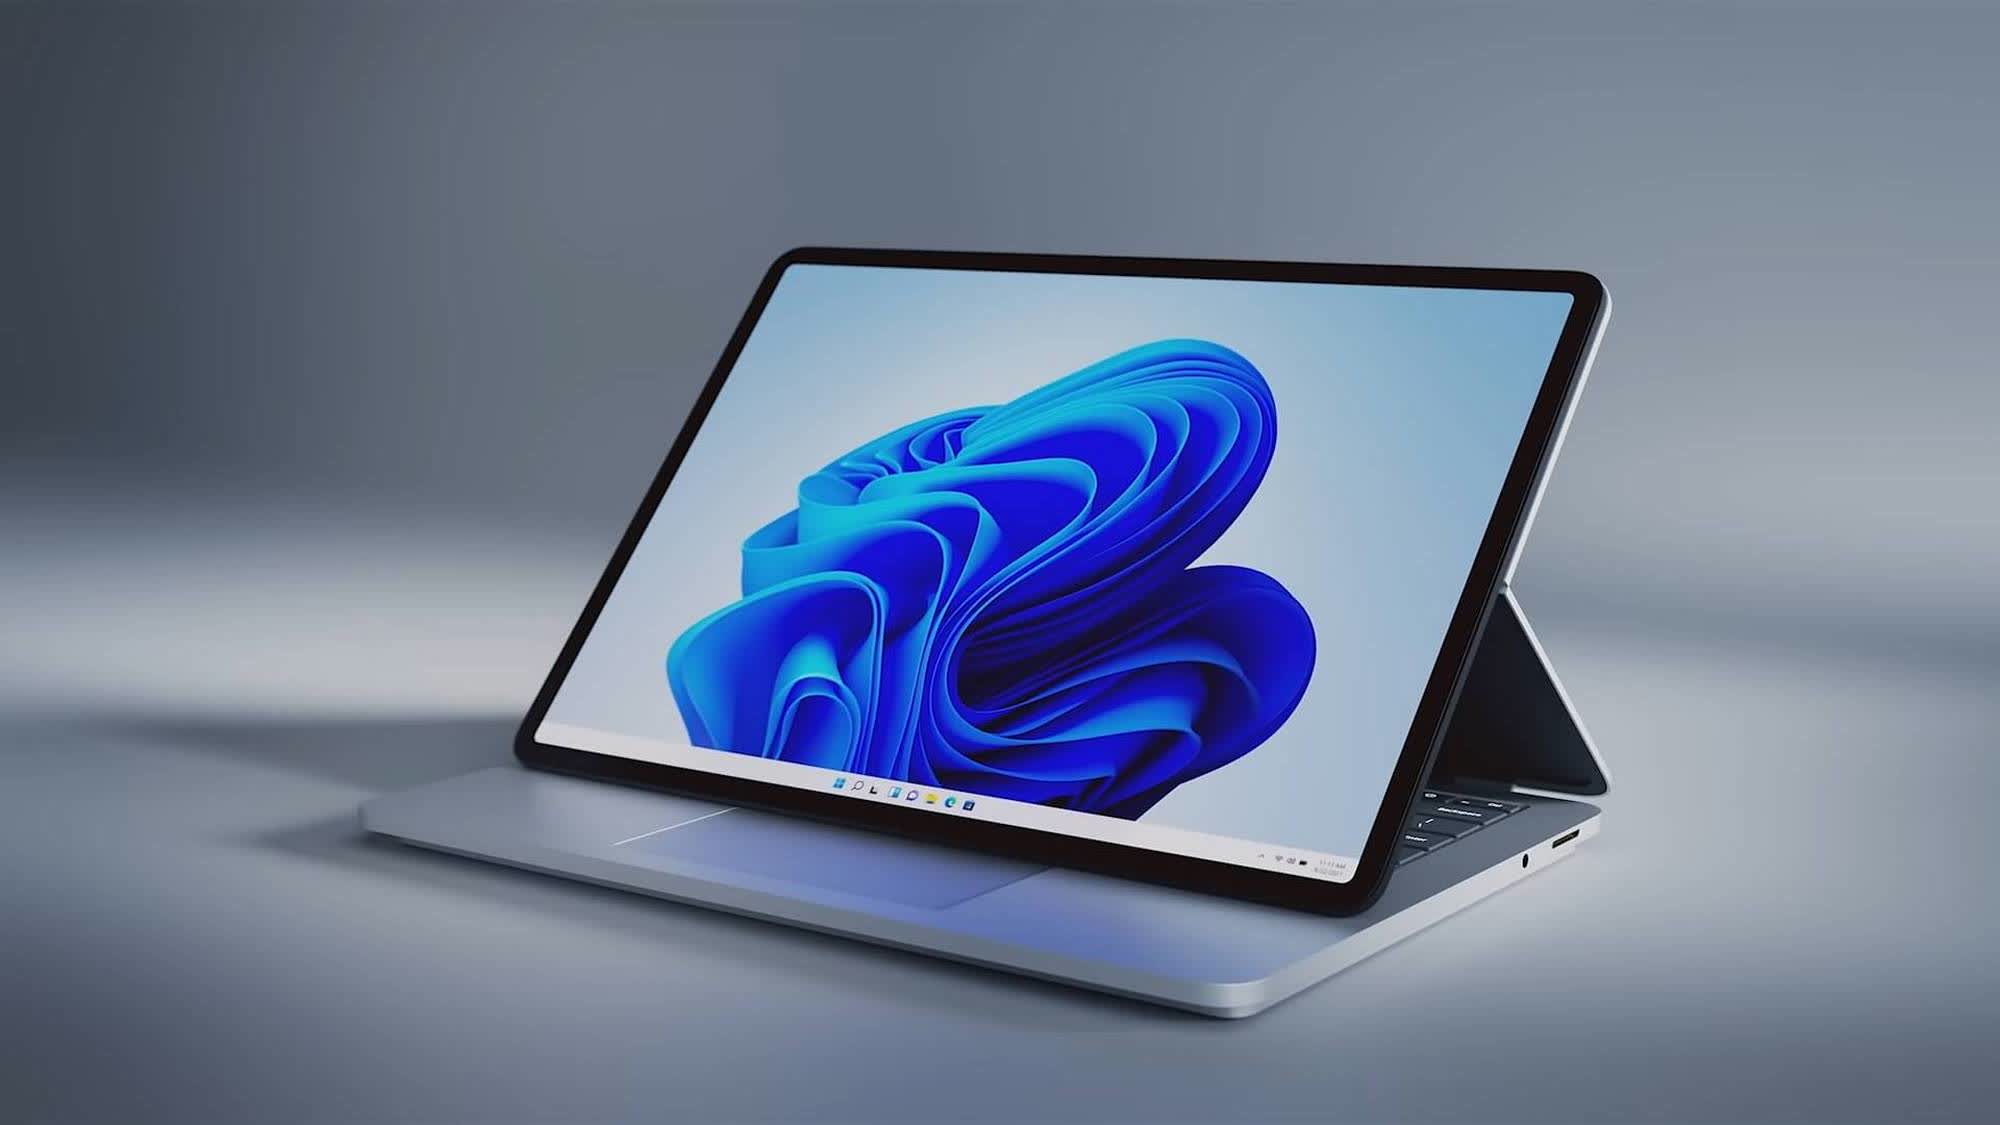 Microsoft's next-gen Surface laptops expected to showcase true AI features